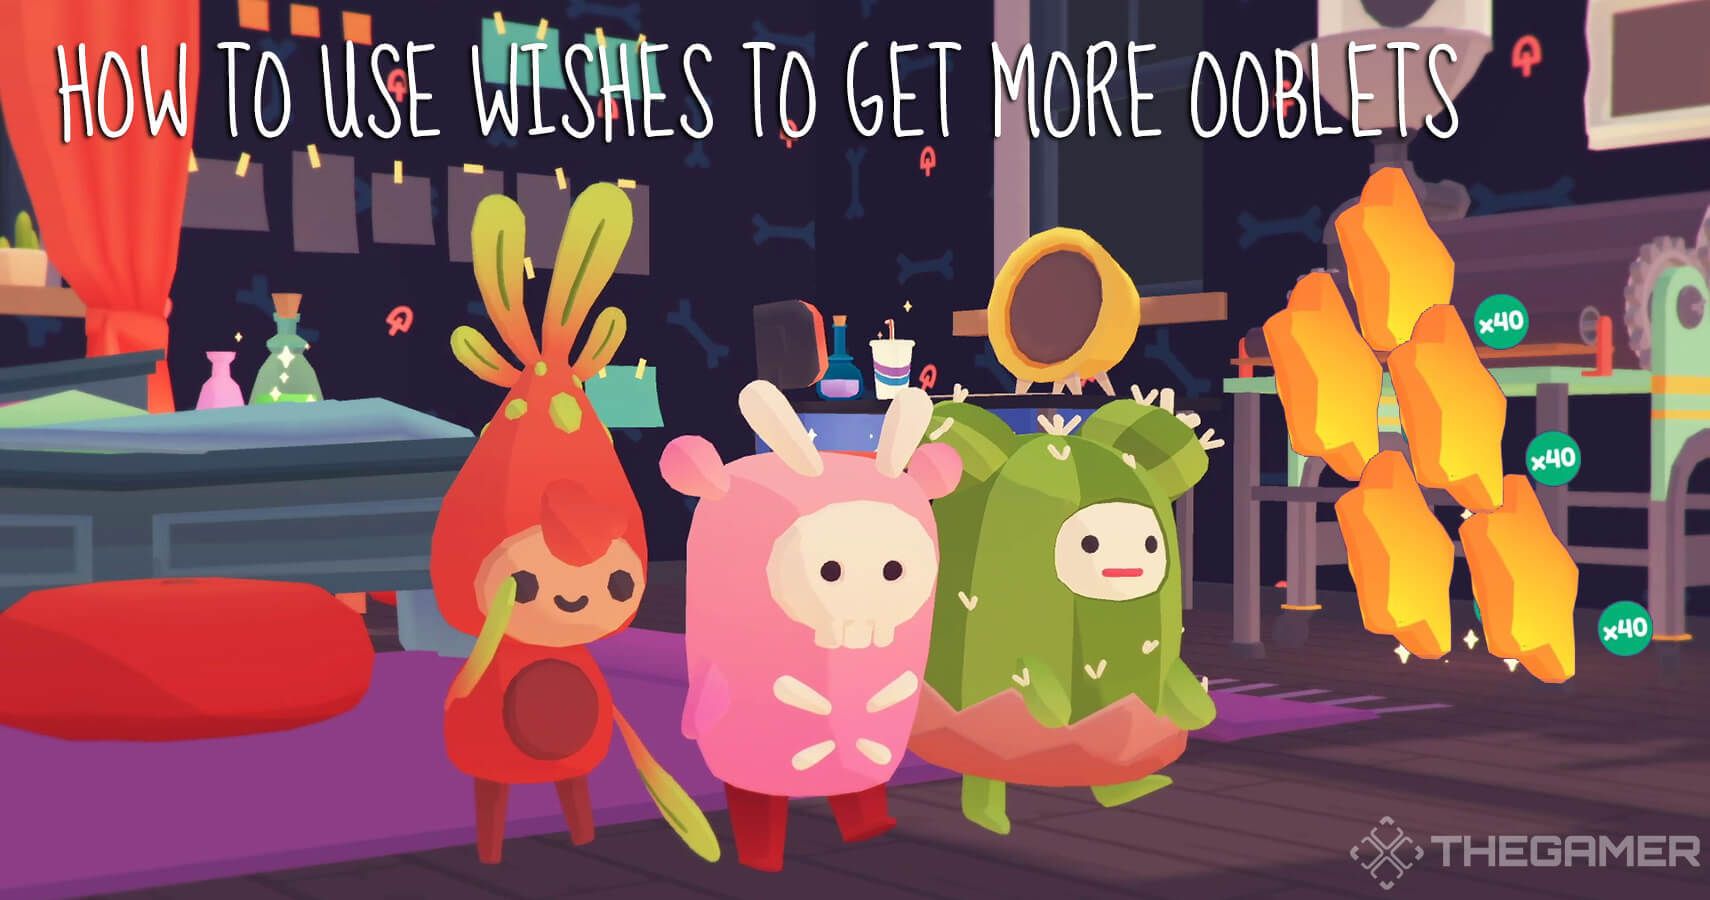 Ooblets download the last version for windows